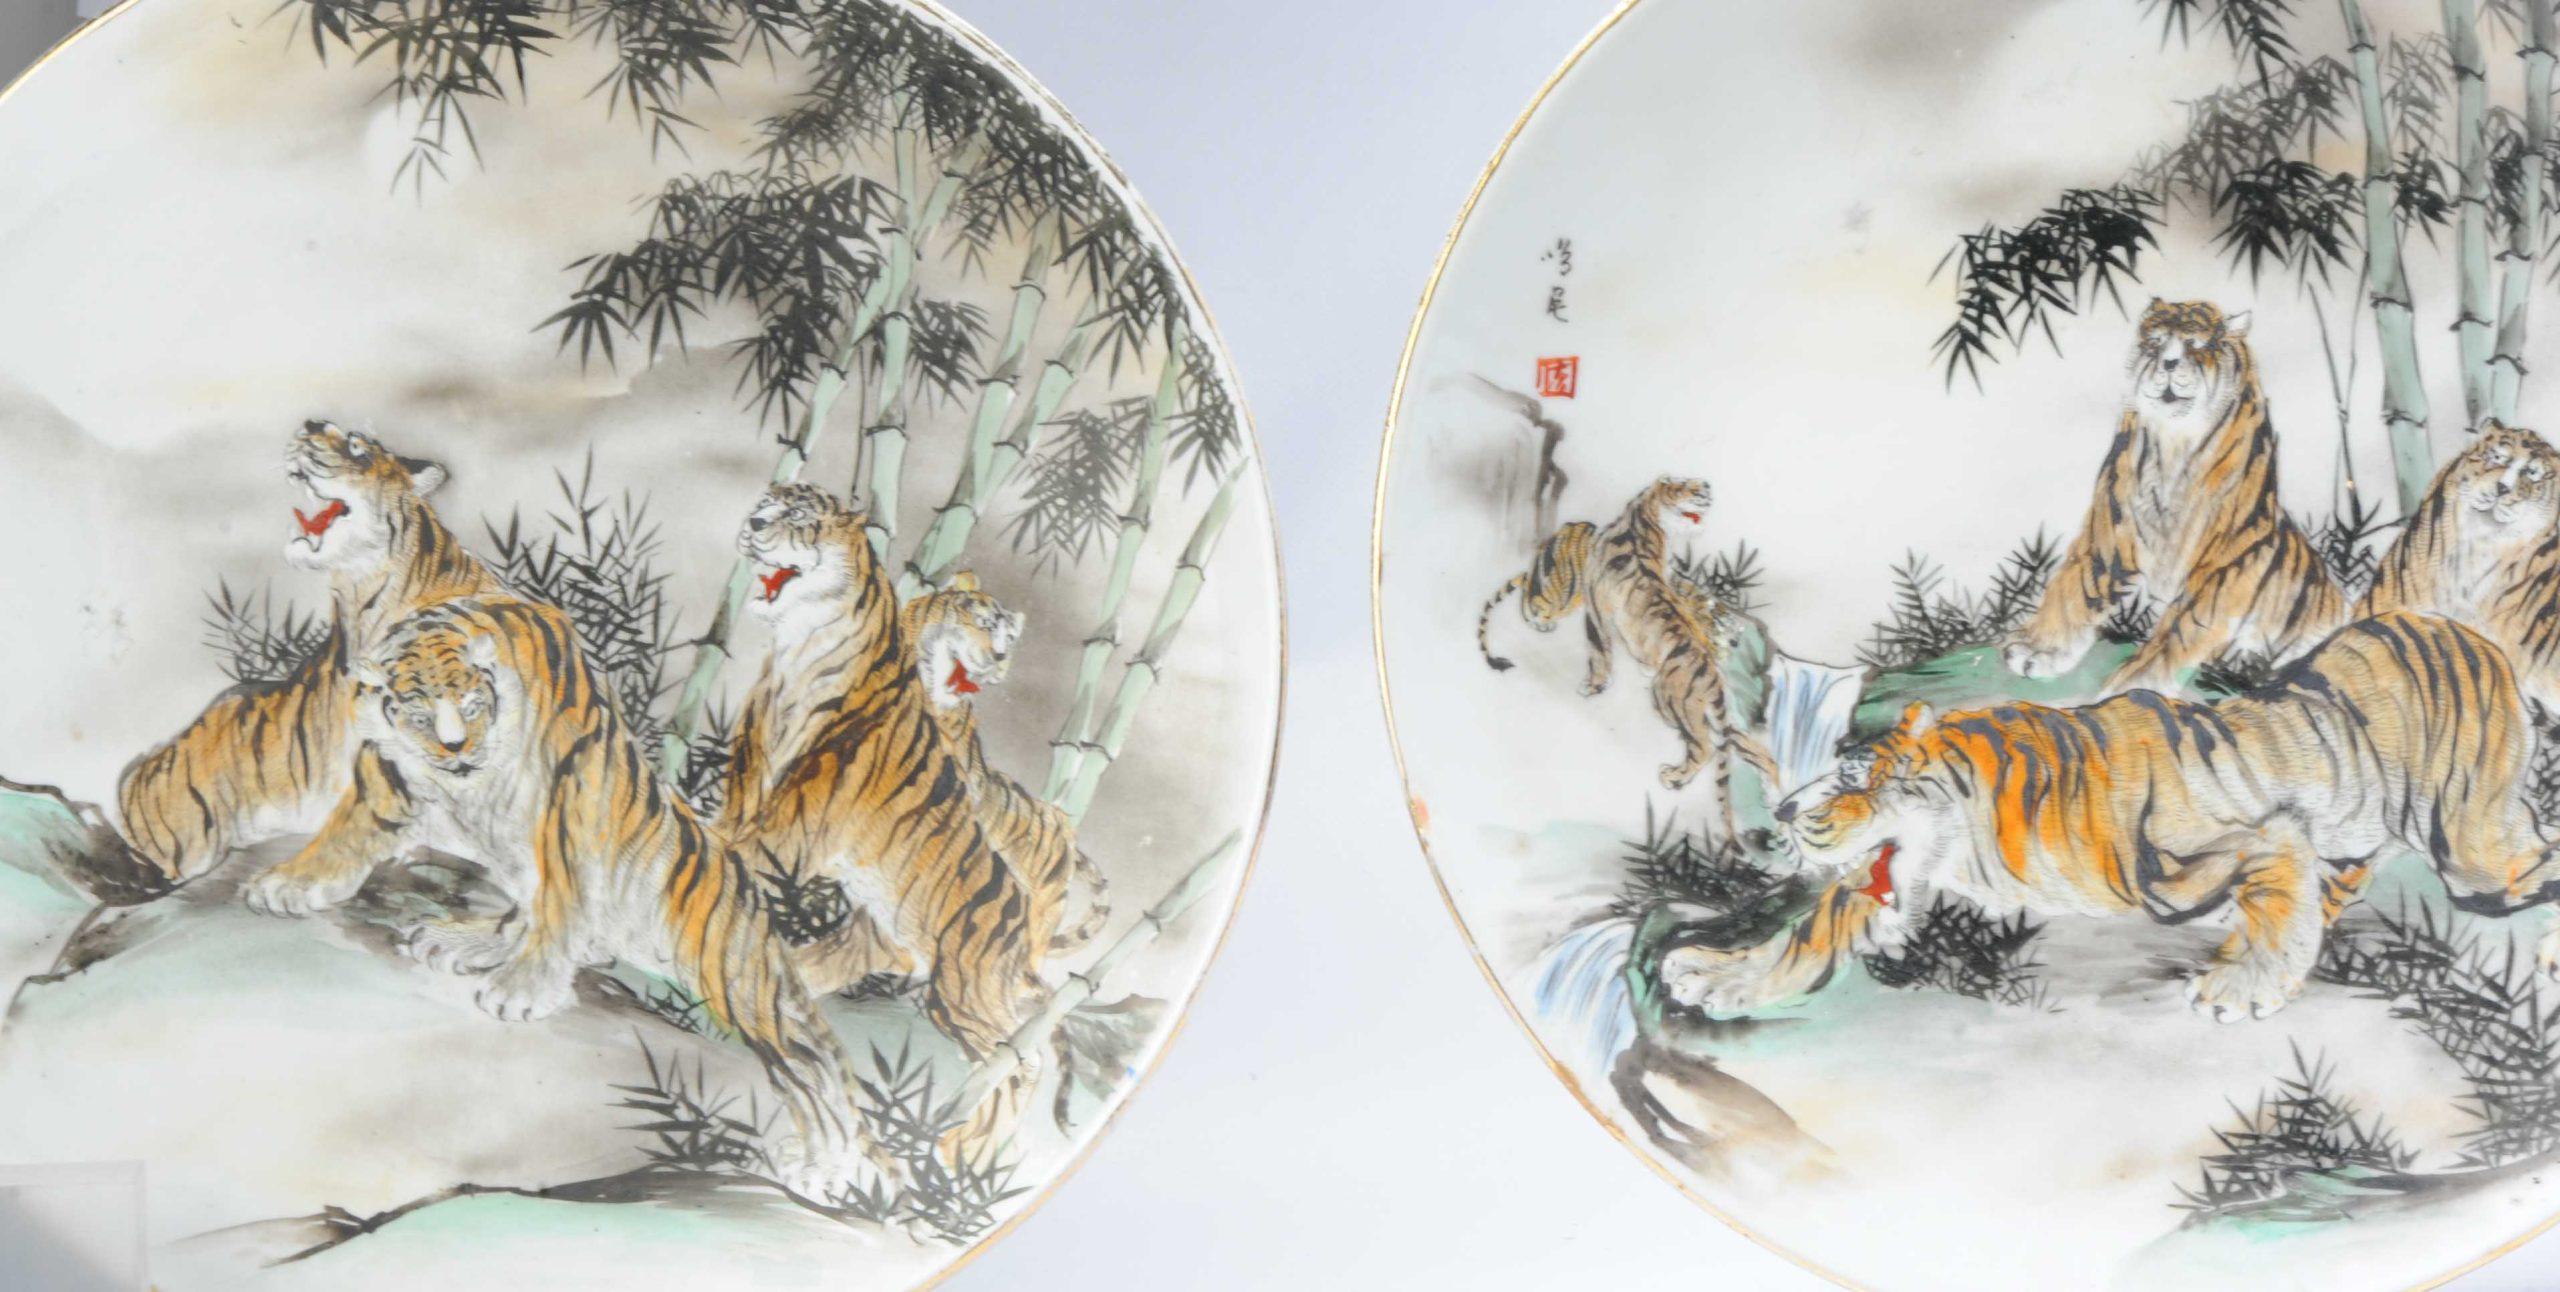 Very lovely pair of pieces with a nicely painted scene of tigers in a rocky bamboo landscape. Yamatoku Arita from Ca 1910-1930.

Marked at base and front.

Additional information:
Material: Porcelain & Pottery
Japanese Style: Arita
Region of Origin: